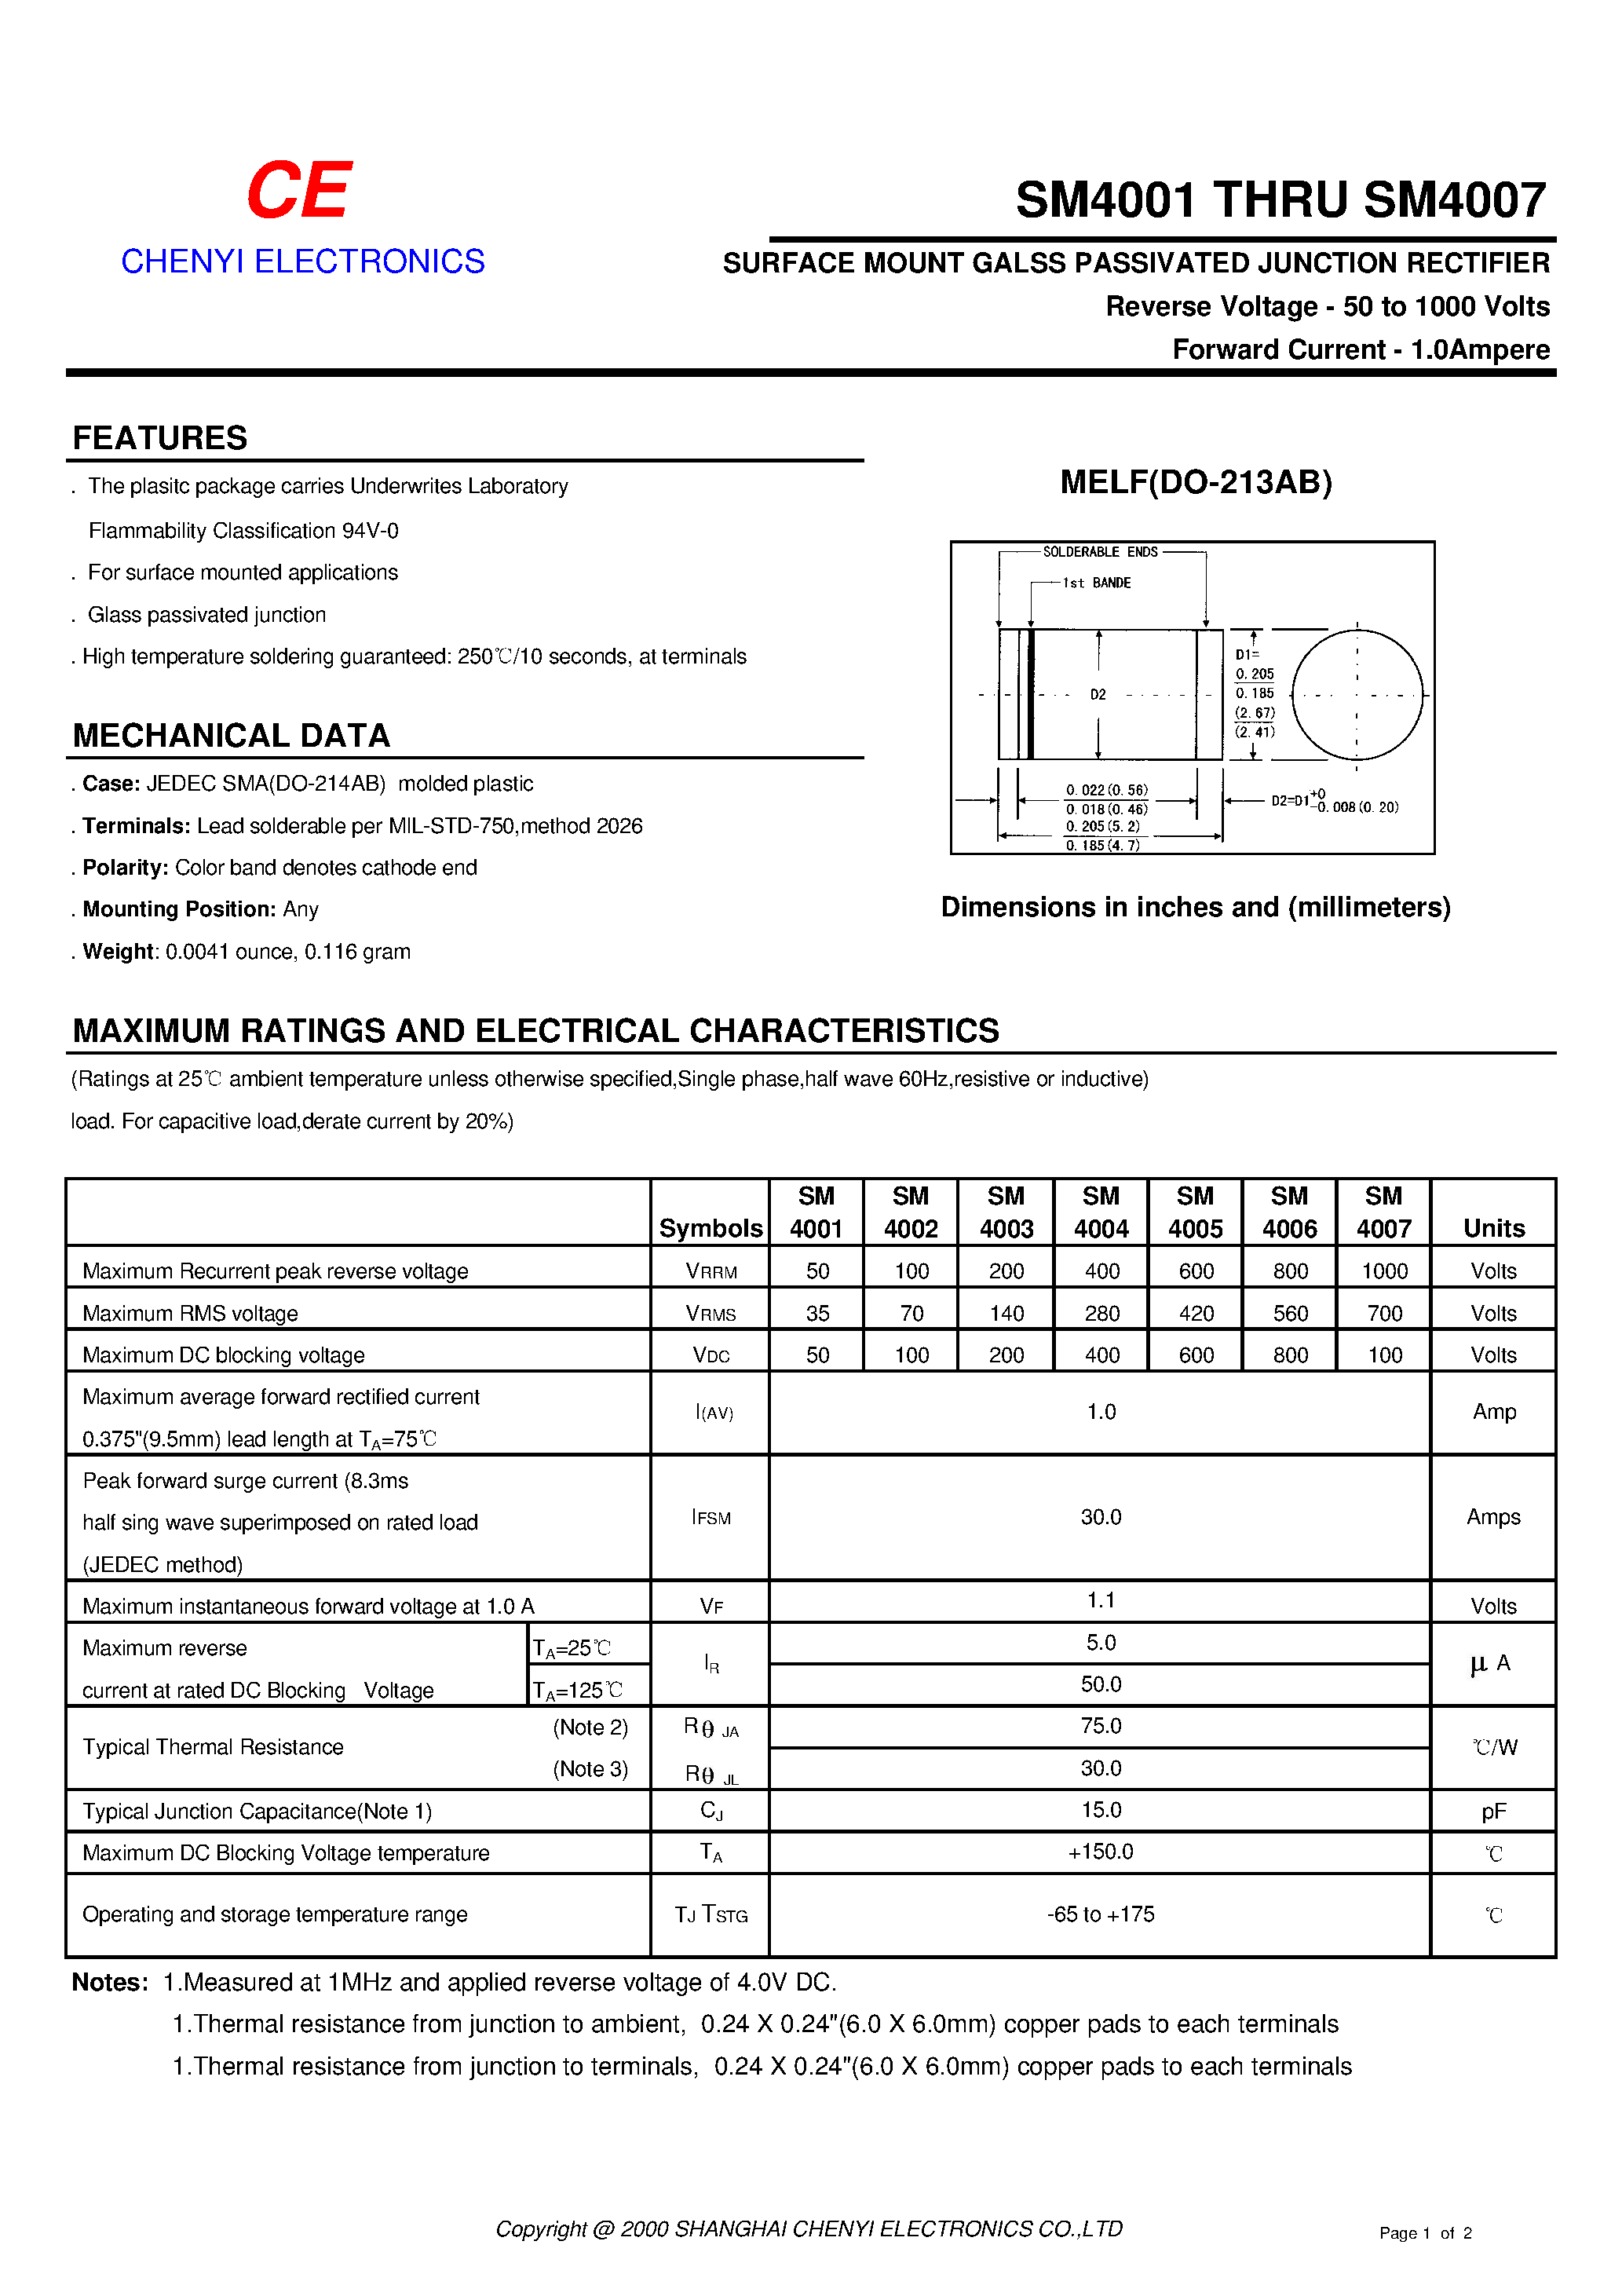 Даташит SM4003 - SURFACE MOUNT GALSS PASSIVATED JUNCTION RECTIFIER страница 1